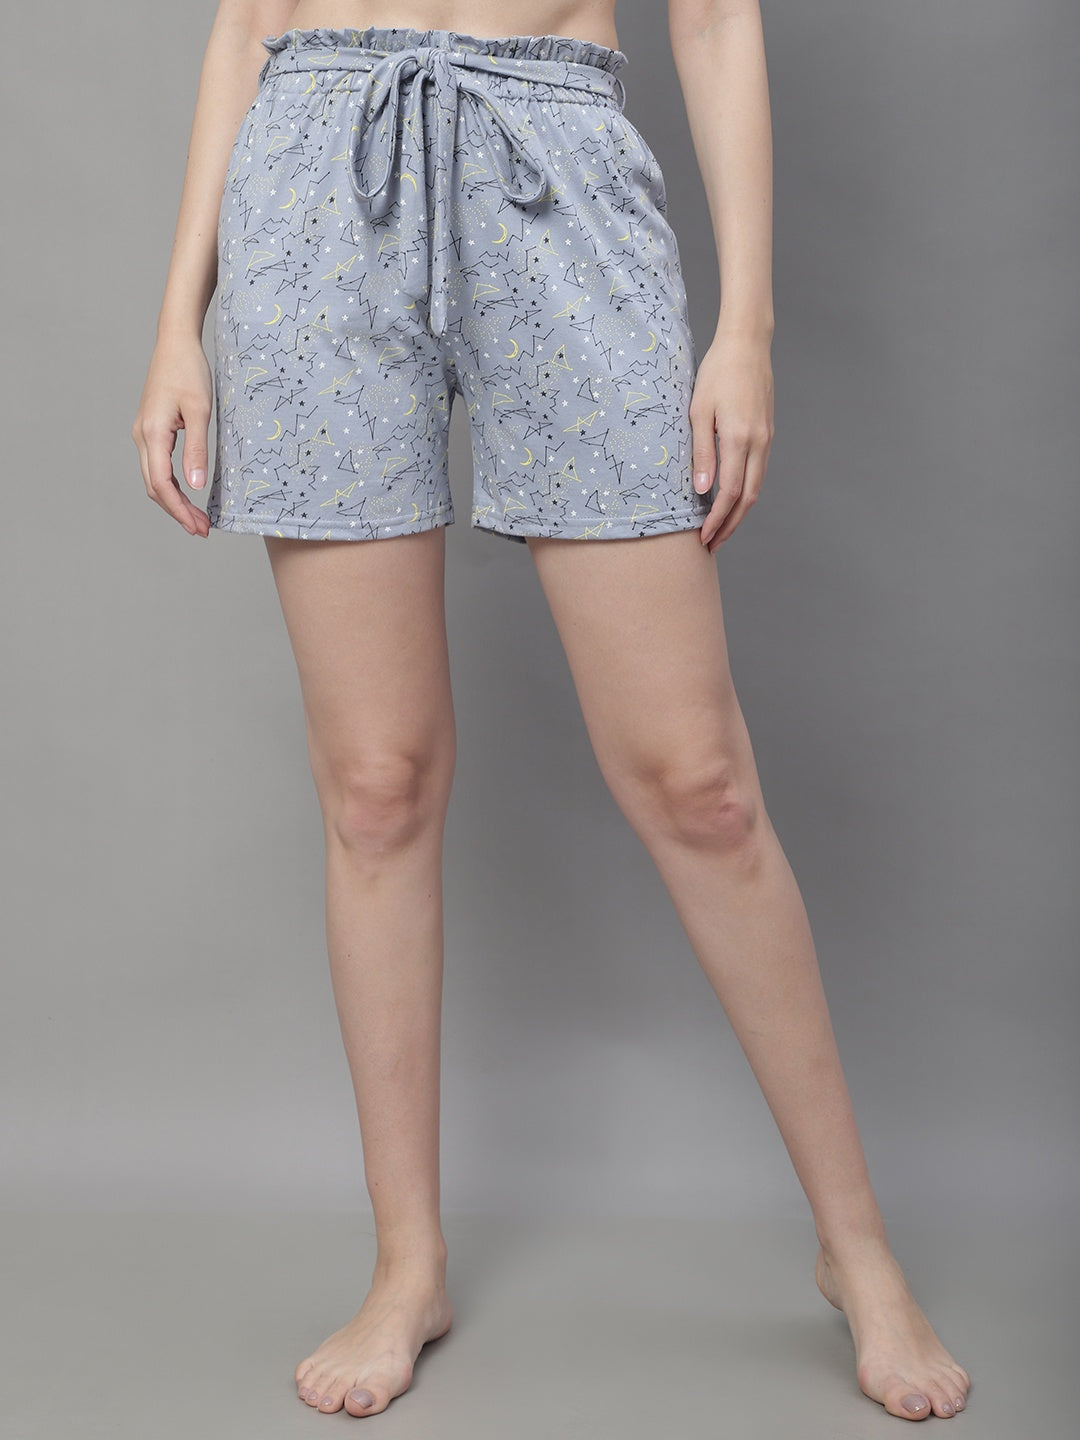 Grey Color Abstract Printed Cotton  Shorts For Woman Claura Designs Pvt. Ltd. Lounge Shorts Abstract, Cotton, Grey, Lounge Short, Loungeshort_size, Printed, Shorts